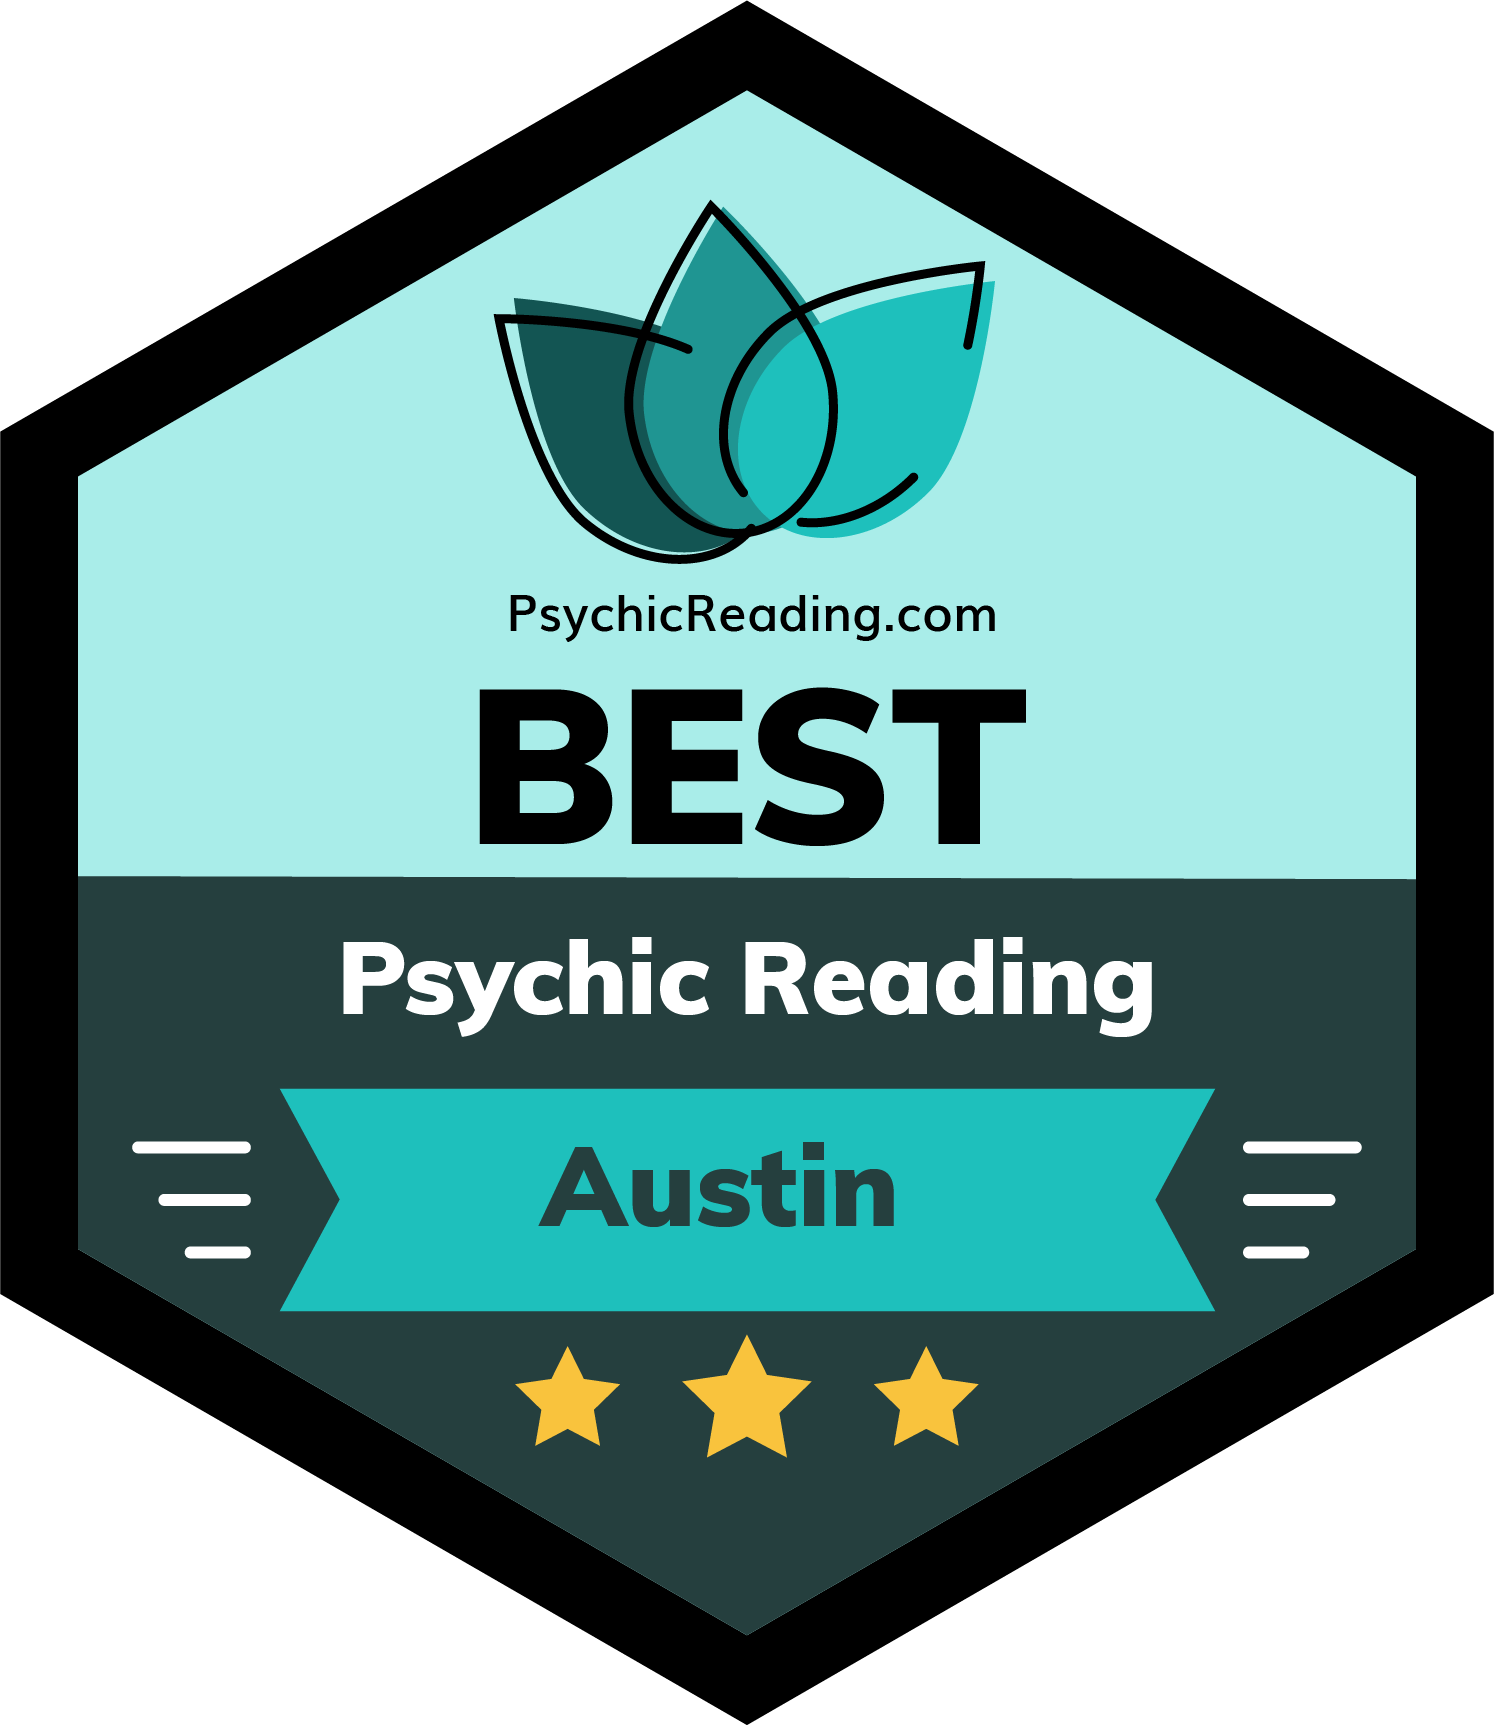 Best Psychic Reading in Austin, Texas of 2022